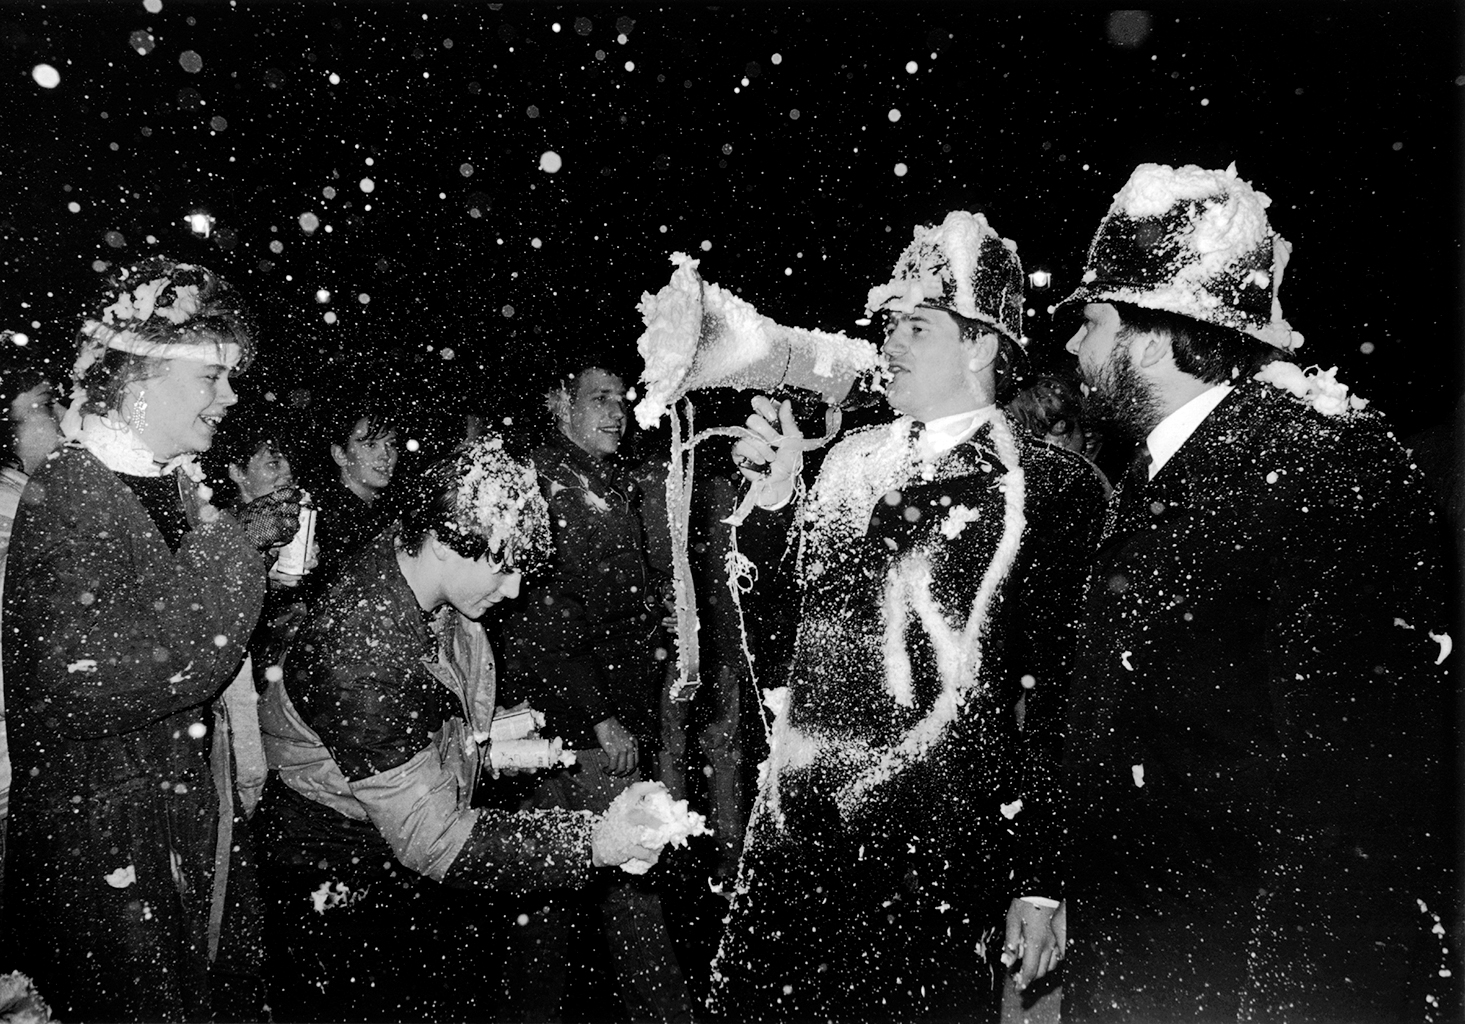 British bobbies in a shaving cream fight on new year's even in 1985 in london, england; photo taken by photographer jill waterman.